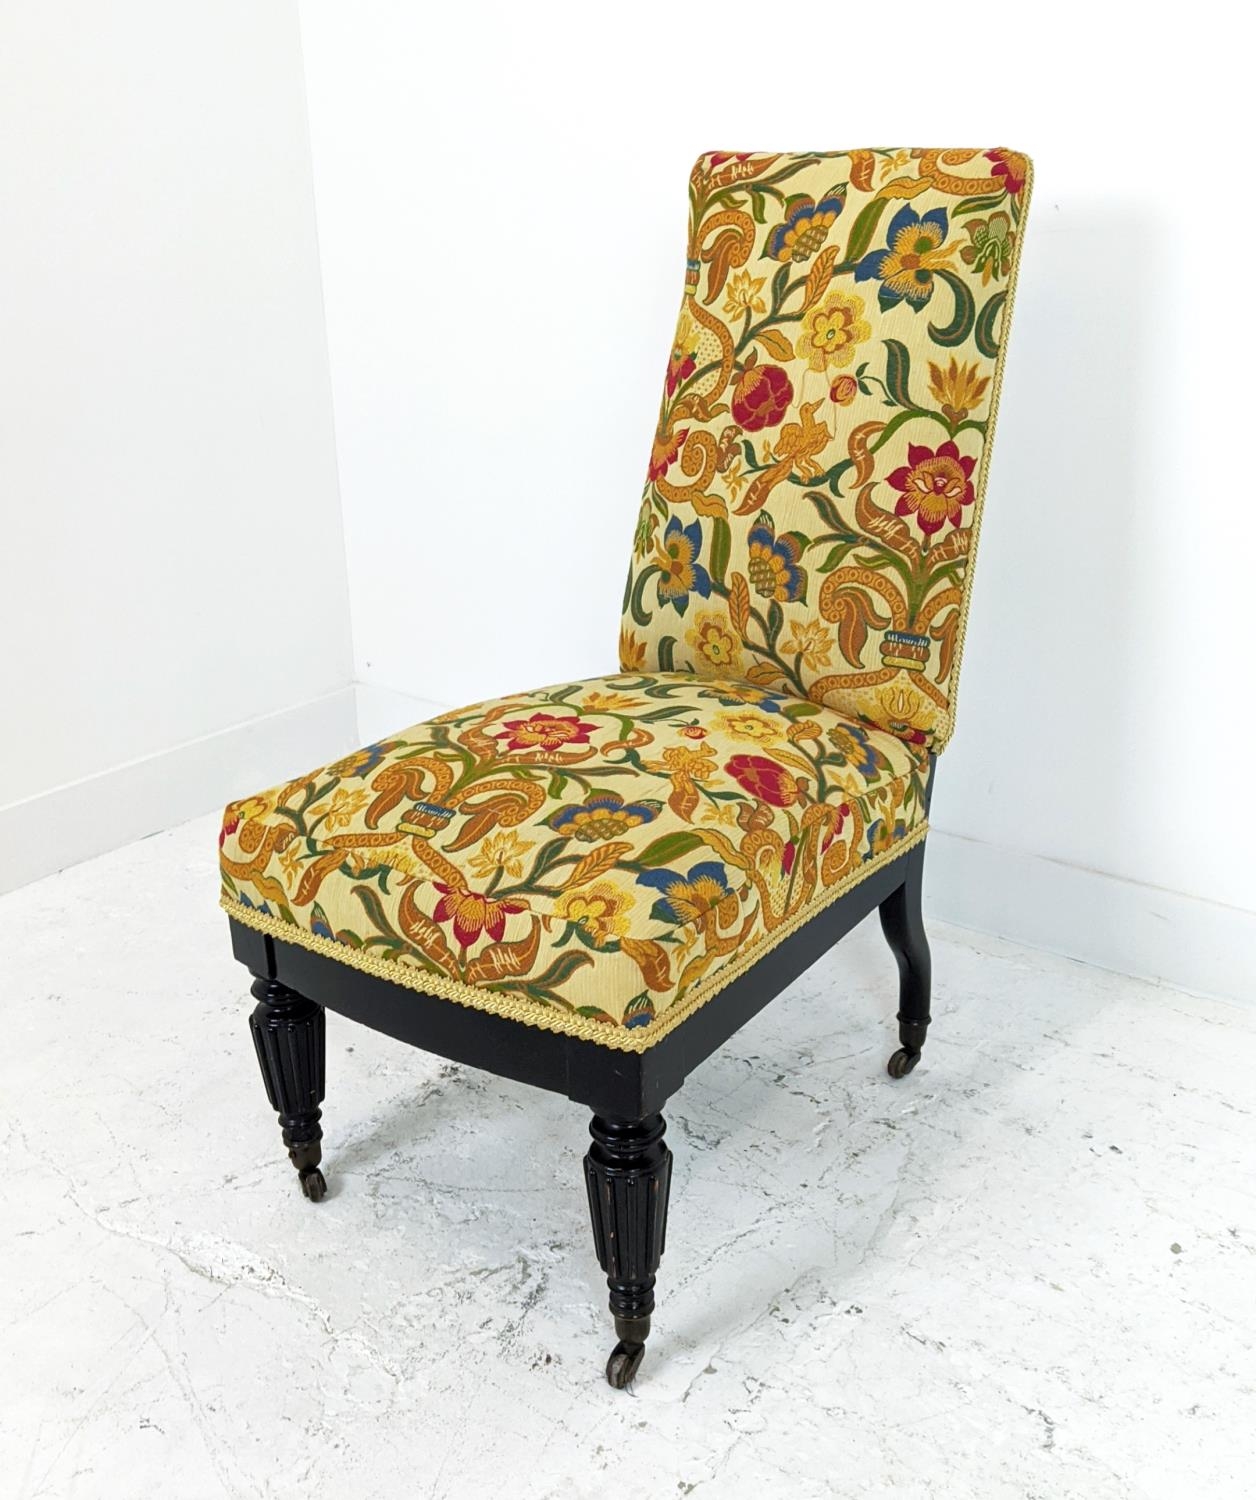 SLIPPER CHAIR, 19th century ebonised with William Morris patterned upholstery, 96cm H x 51cm W. - Image 6 of 18